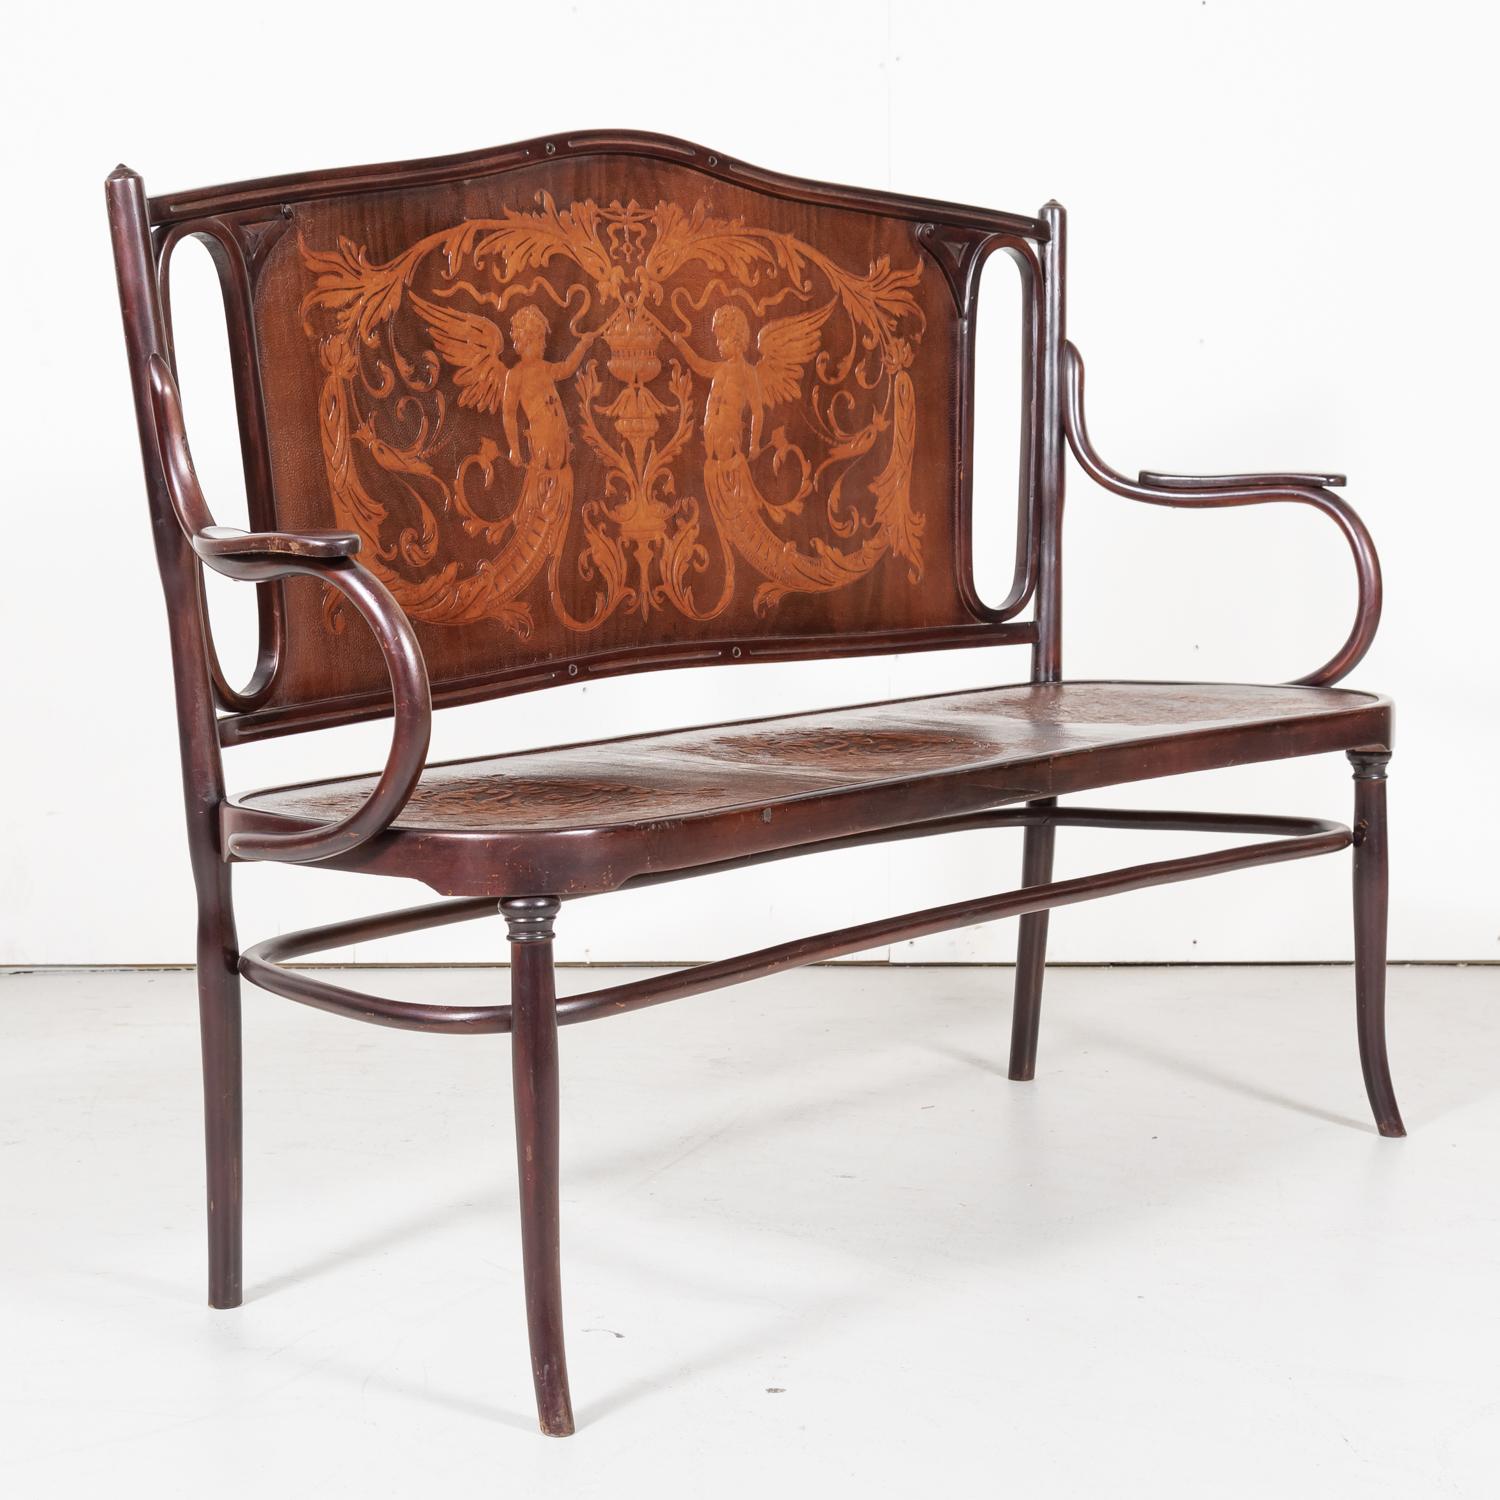 A rare Vienna Secession J. & J. Kohn bentwood bench, circa late 1800s-1902 designed and manufactured by the famed father and son duo, Jacob and Josef Kohn of Vienna, Austria. Having a beechwood frame, embossed/pressed seat and backrest, flaring